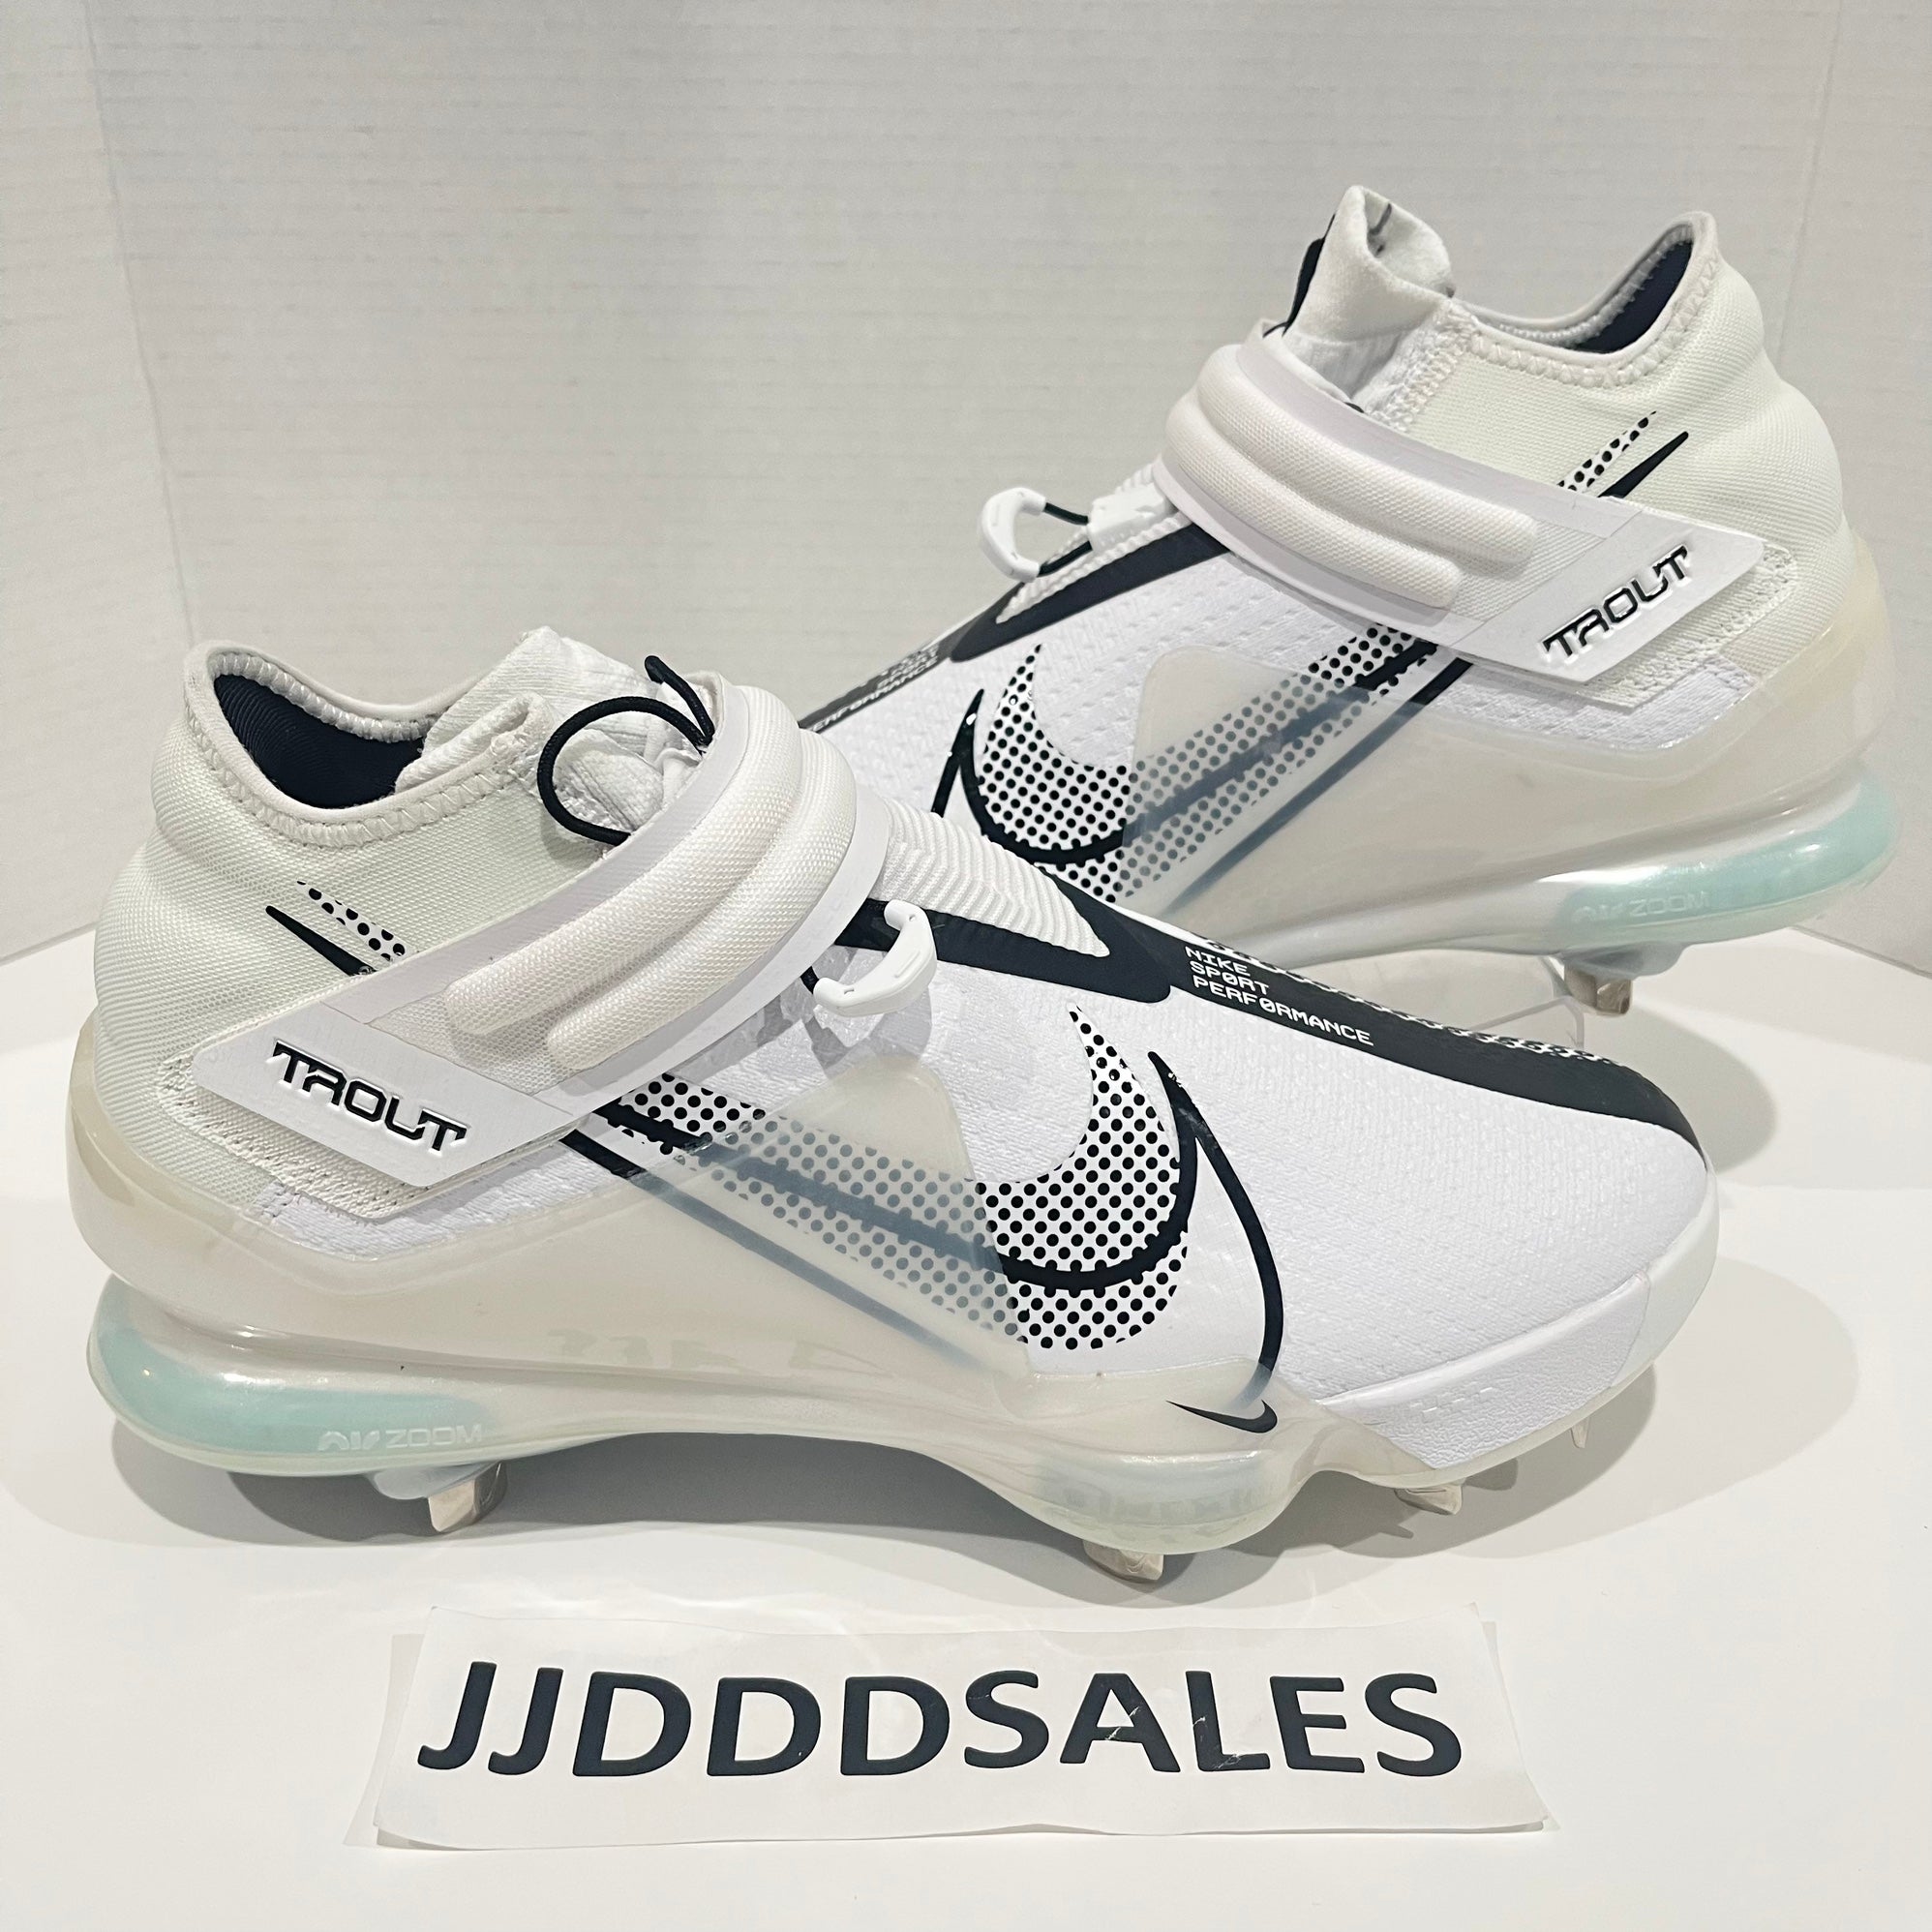 Nike Boys Baseball Cleats Force Trout 7 White 1Y CQ7643-102